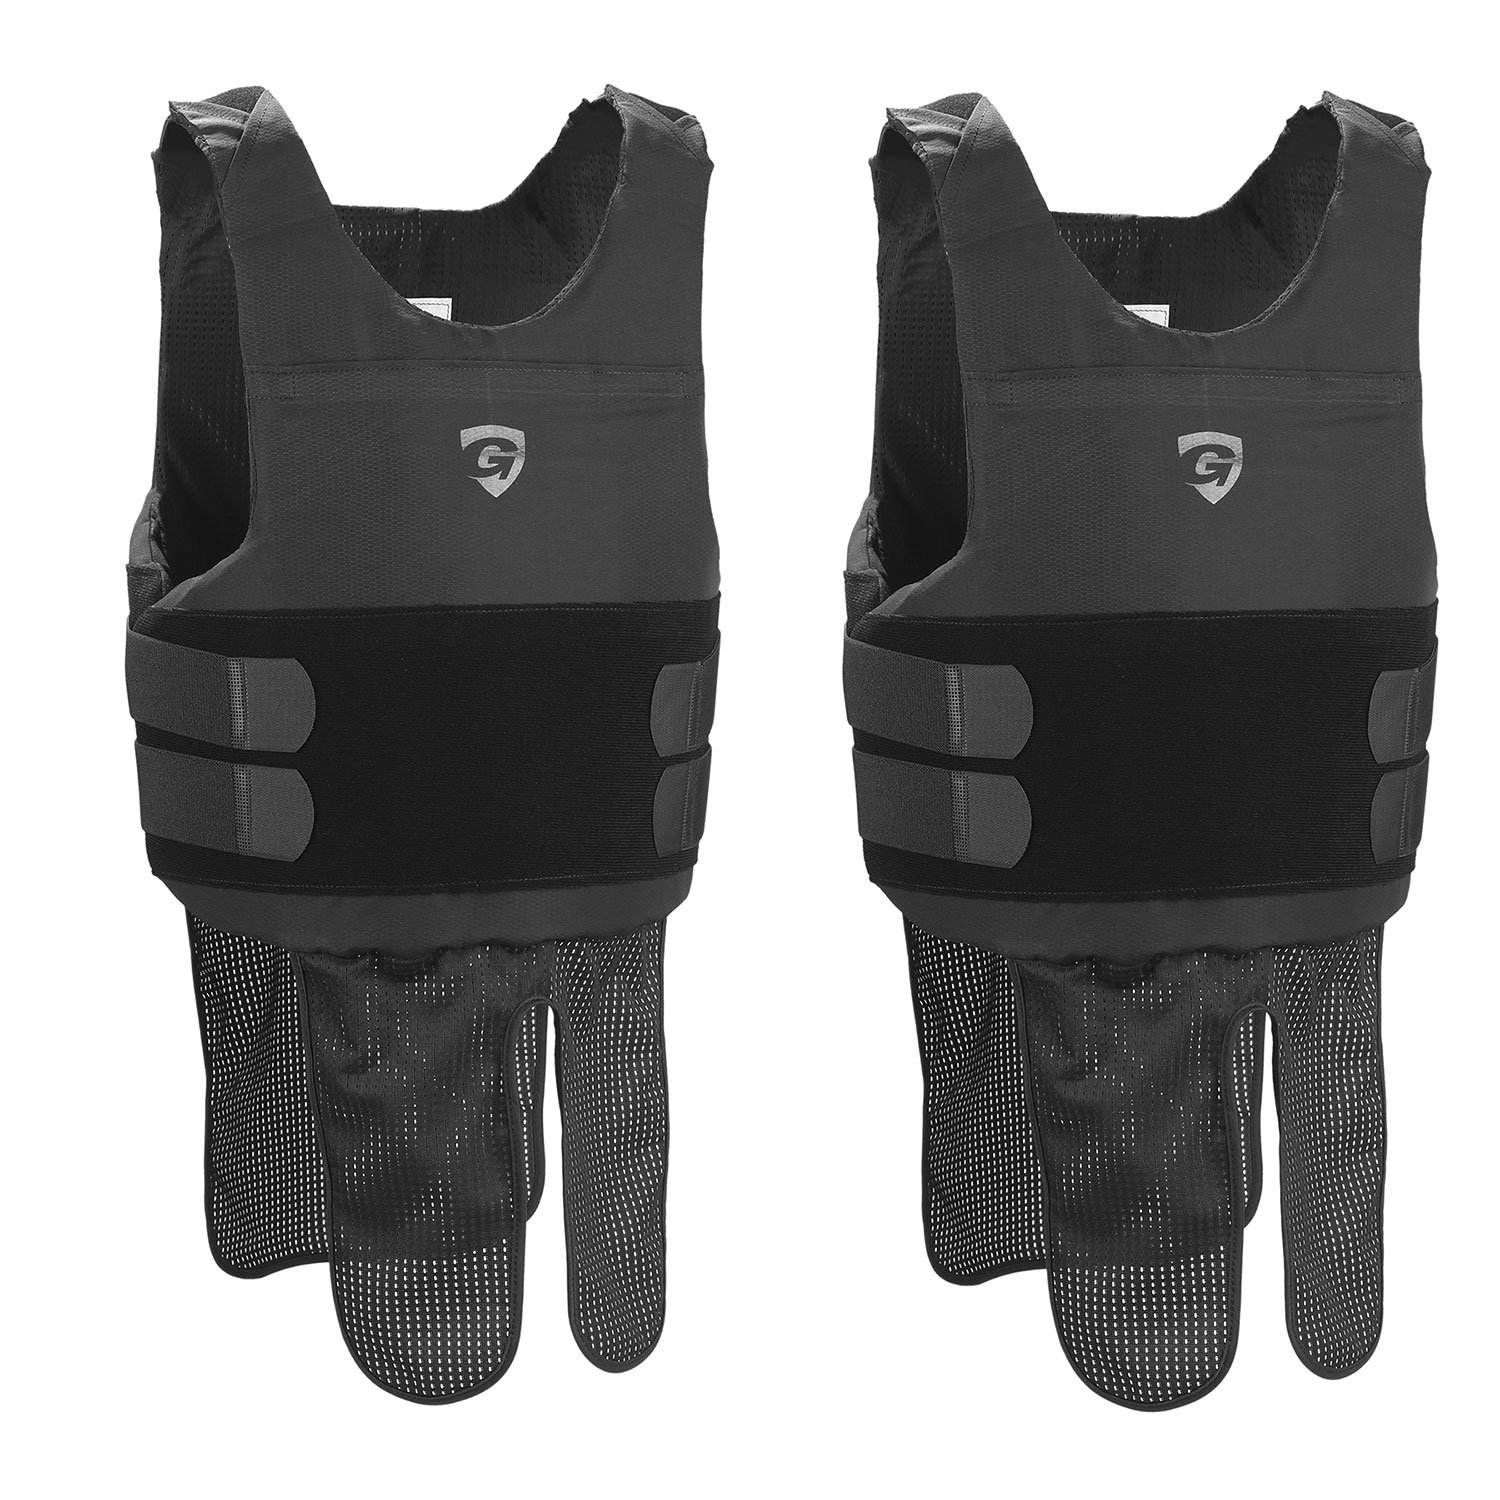 GALLS G FORCE LEVEL IIIA CONCEALABLE BODY ARMOR W 2 CARRIERS